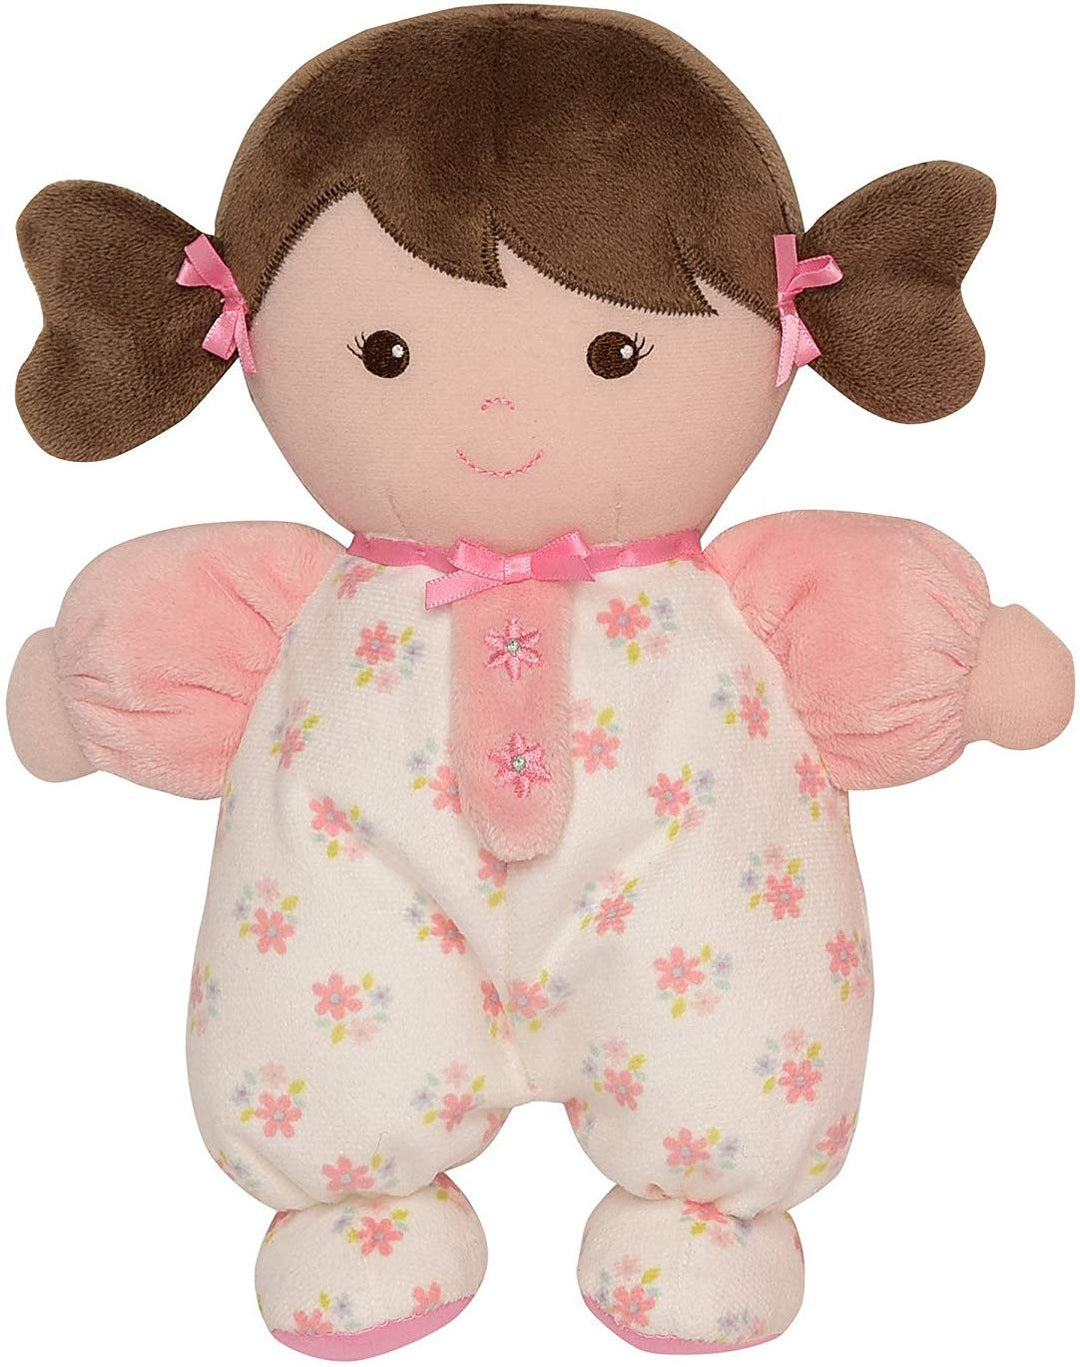 Plush Baby Doll with Rattle, Brunette Olivia, Pink, 9 Inch